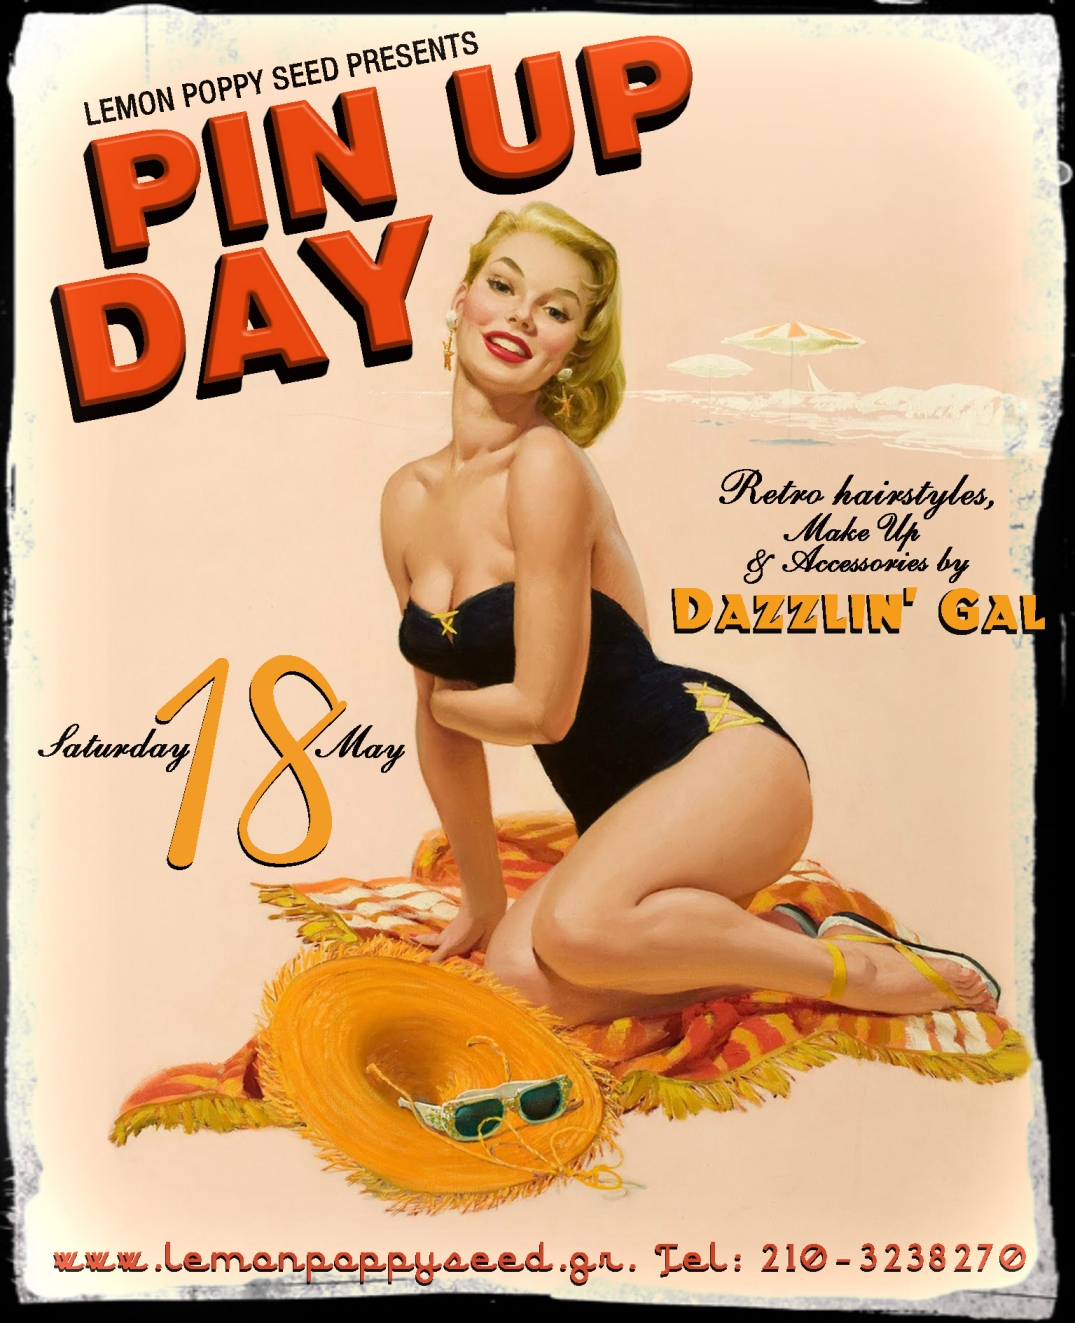 PIN UP DAY with Dazzlin' Gal